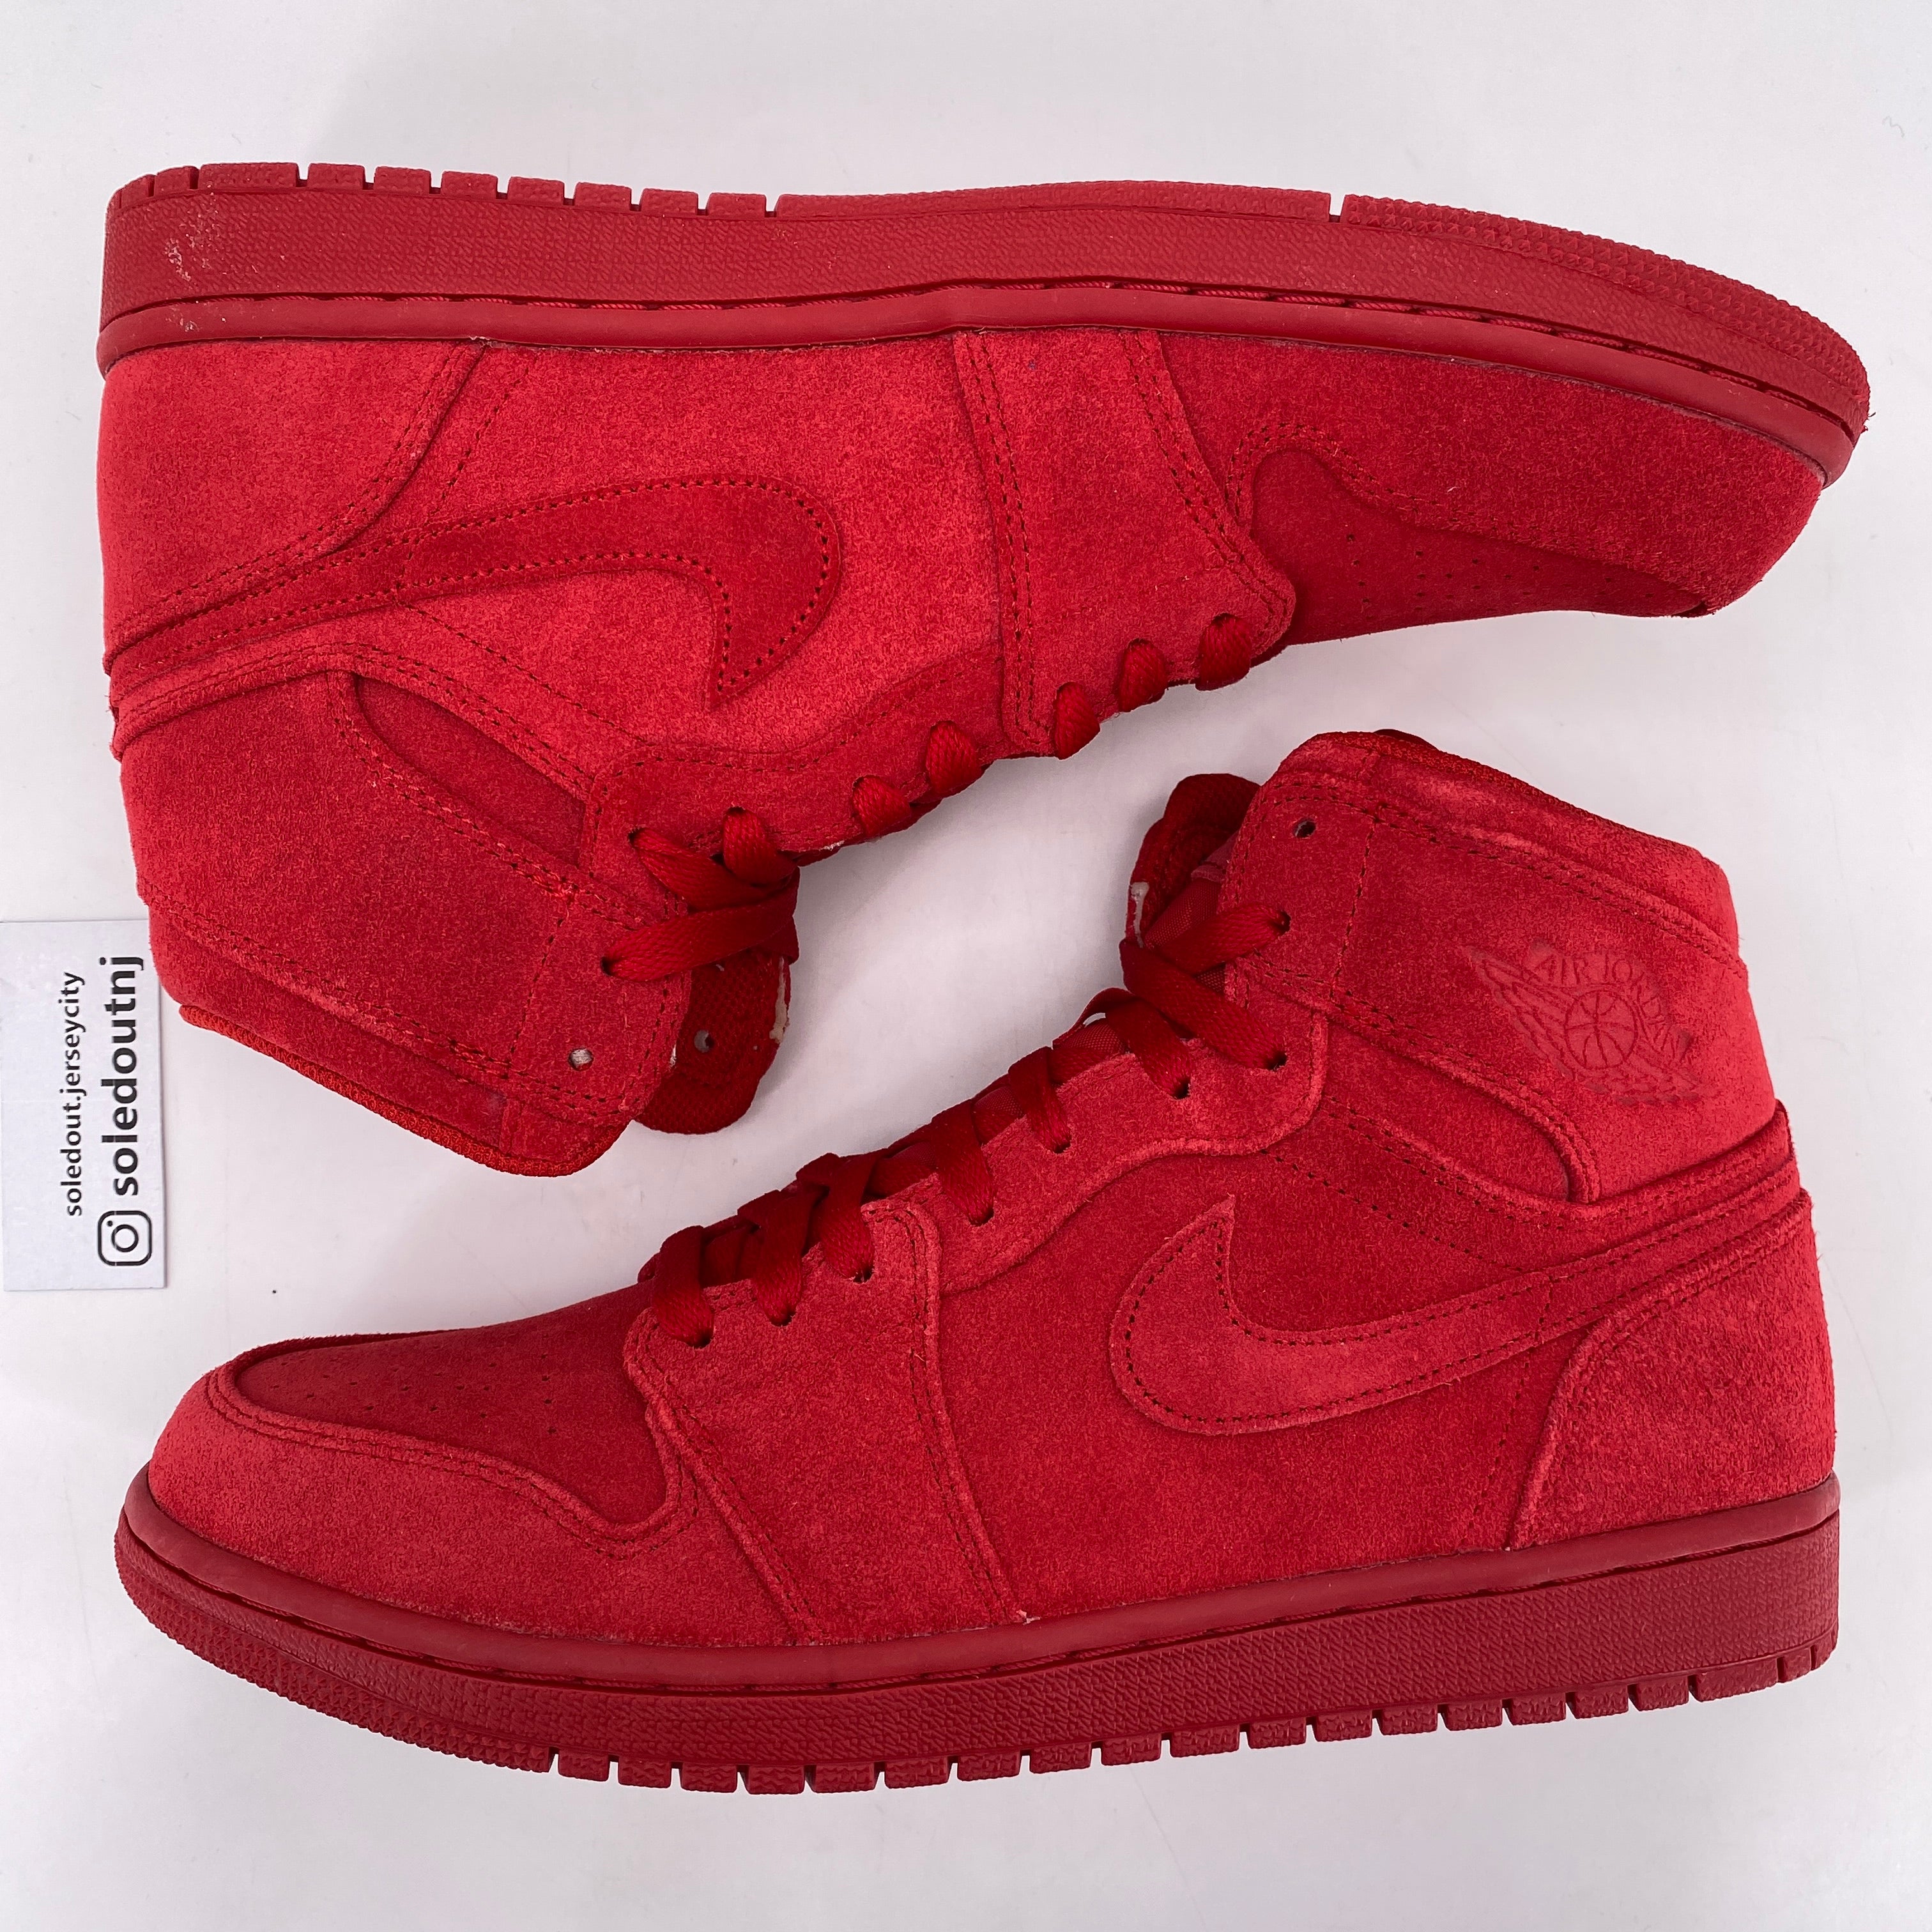 Air Jordan 1 Retro High &quot;Red Suede&quot; 2017 New Size 10.5